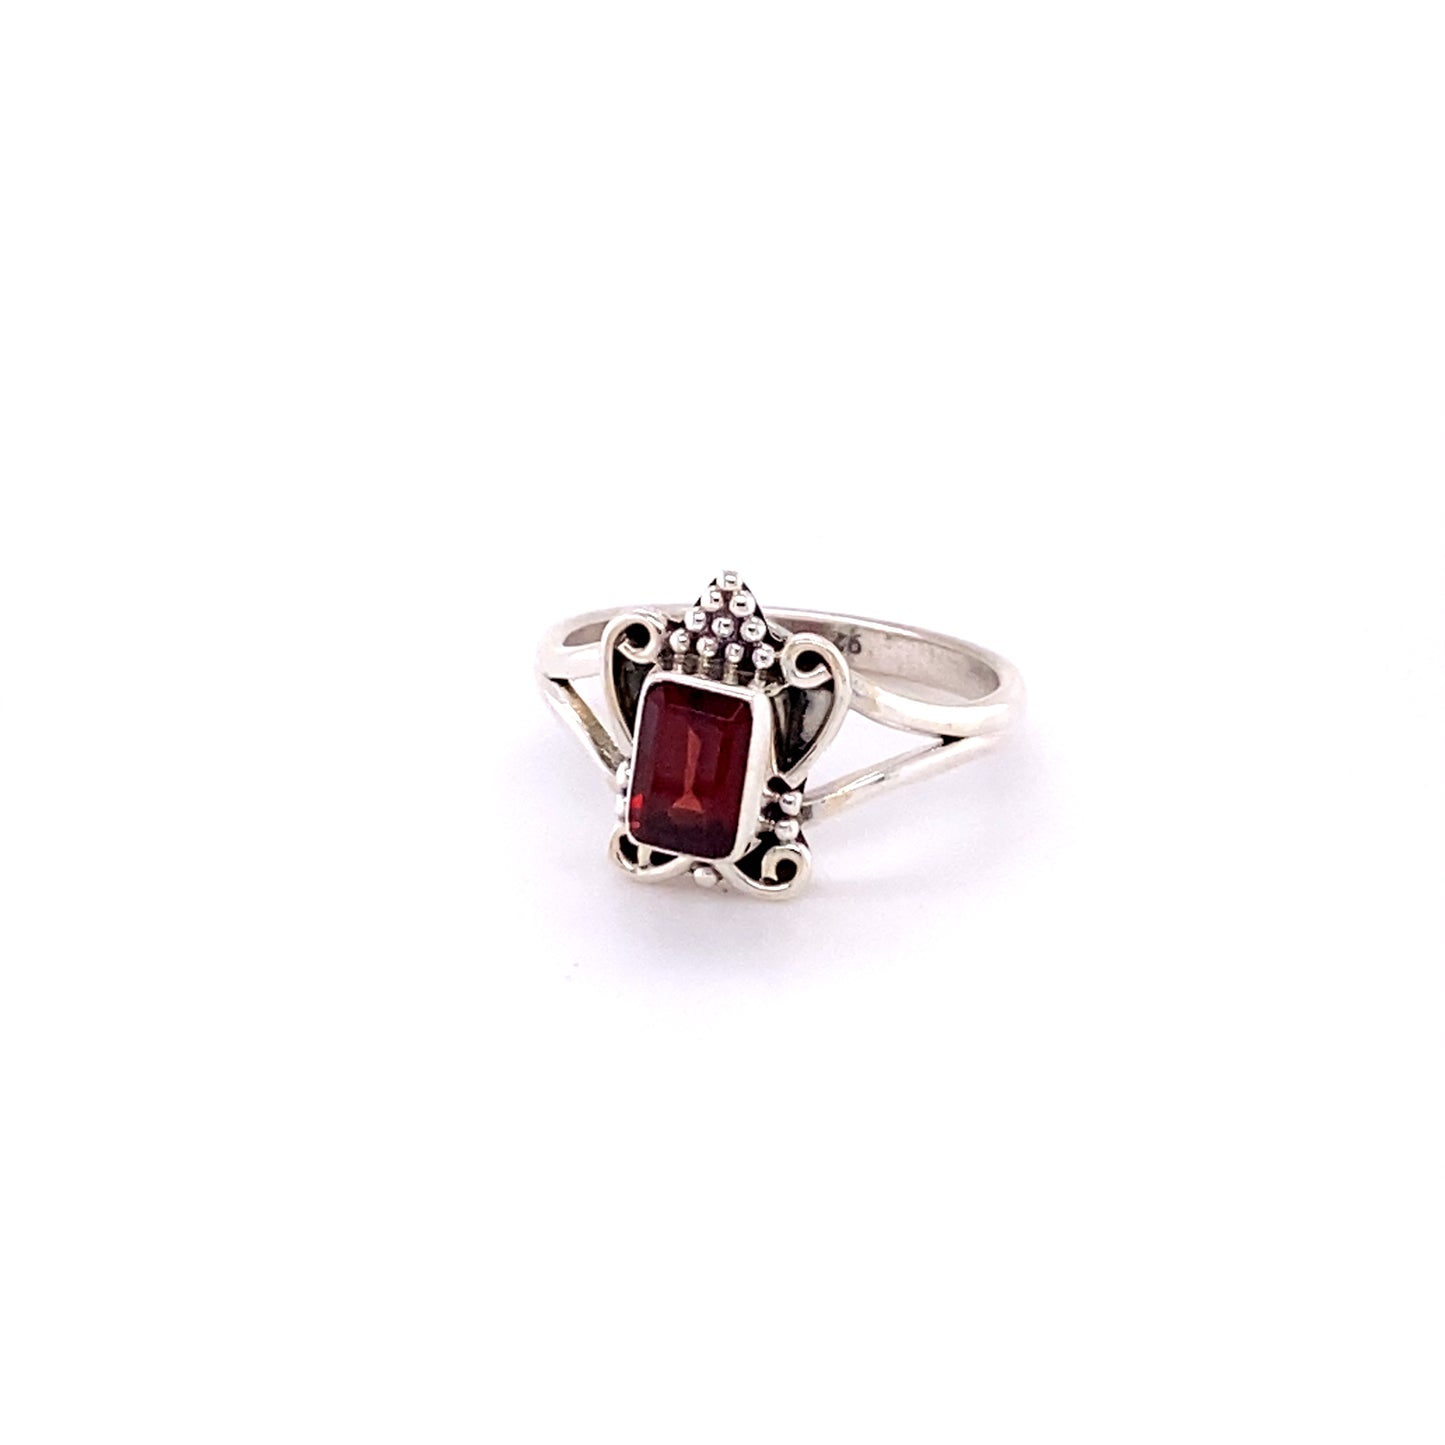 
                  
                    A Bohemian Princess Ring with an ornate design and a rectangular red gemstone set in the center, perfect for those seeking a Boho-style princess ring.
                  
                